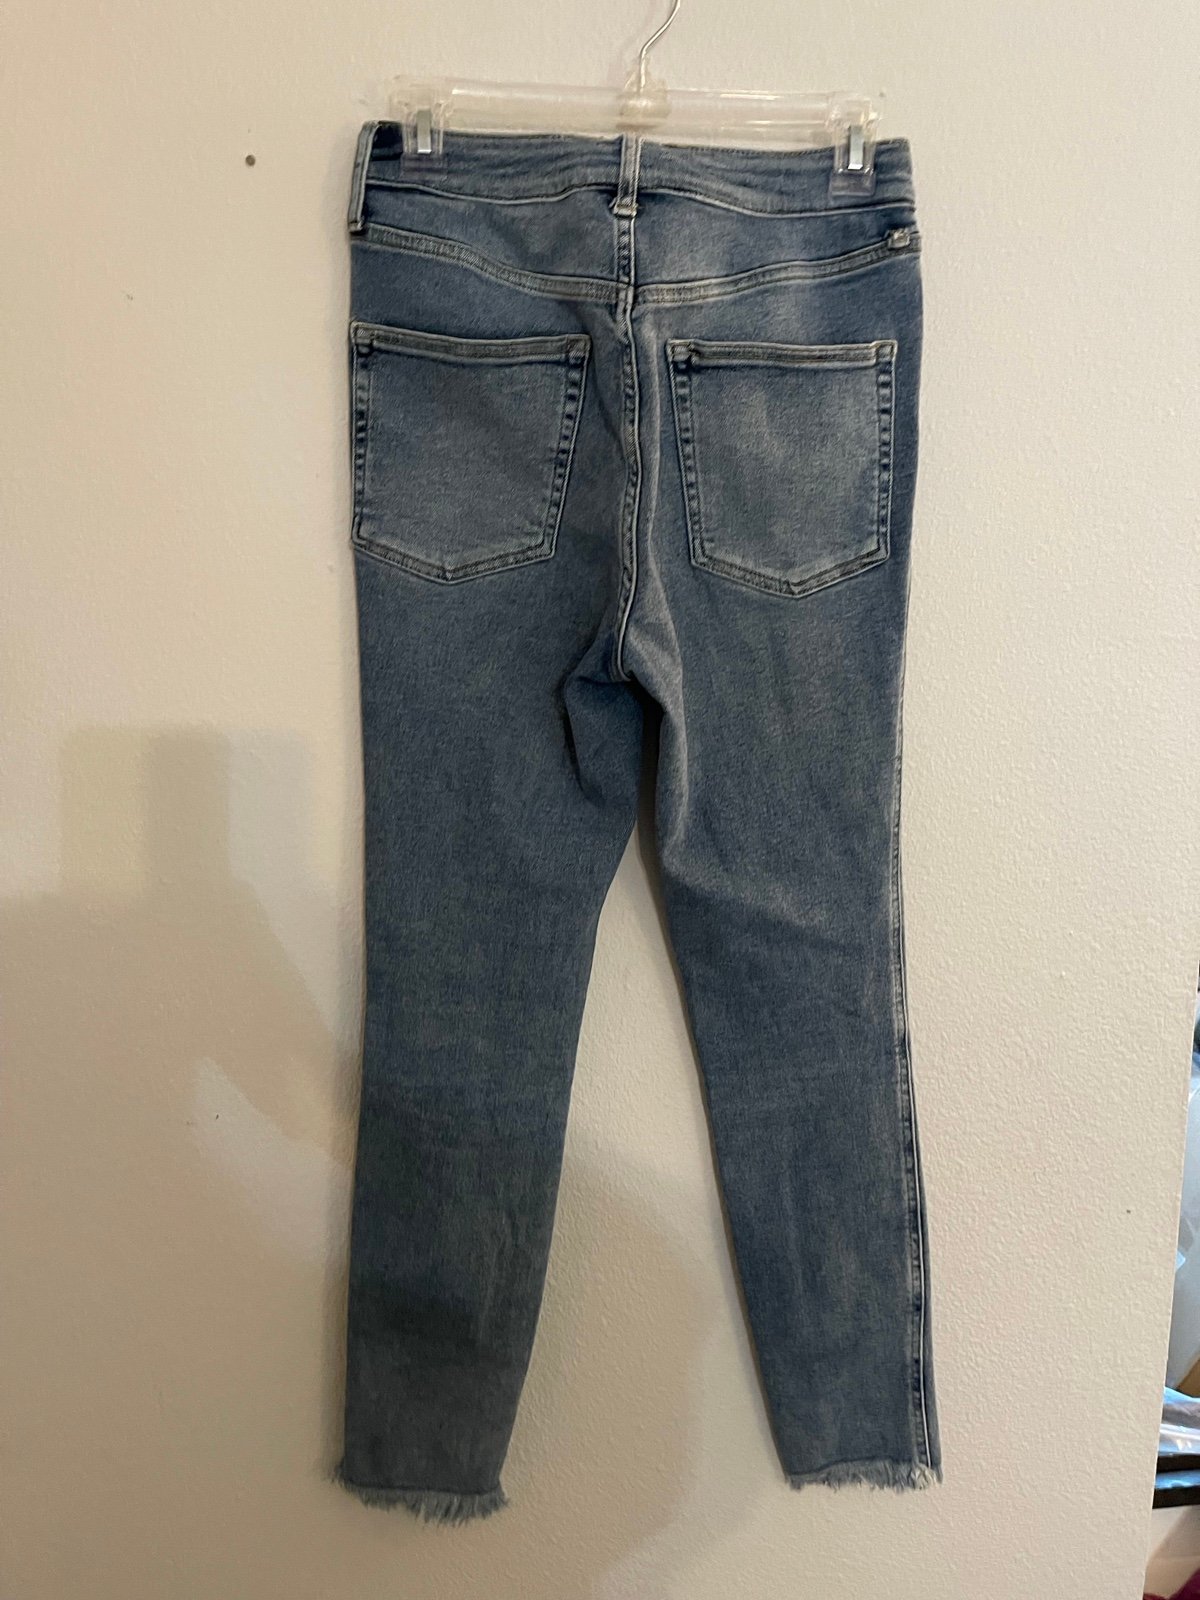 cheapest place to buy  Free People skinny jeans size 29 g3wQApfEm Counter Genuine 